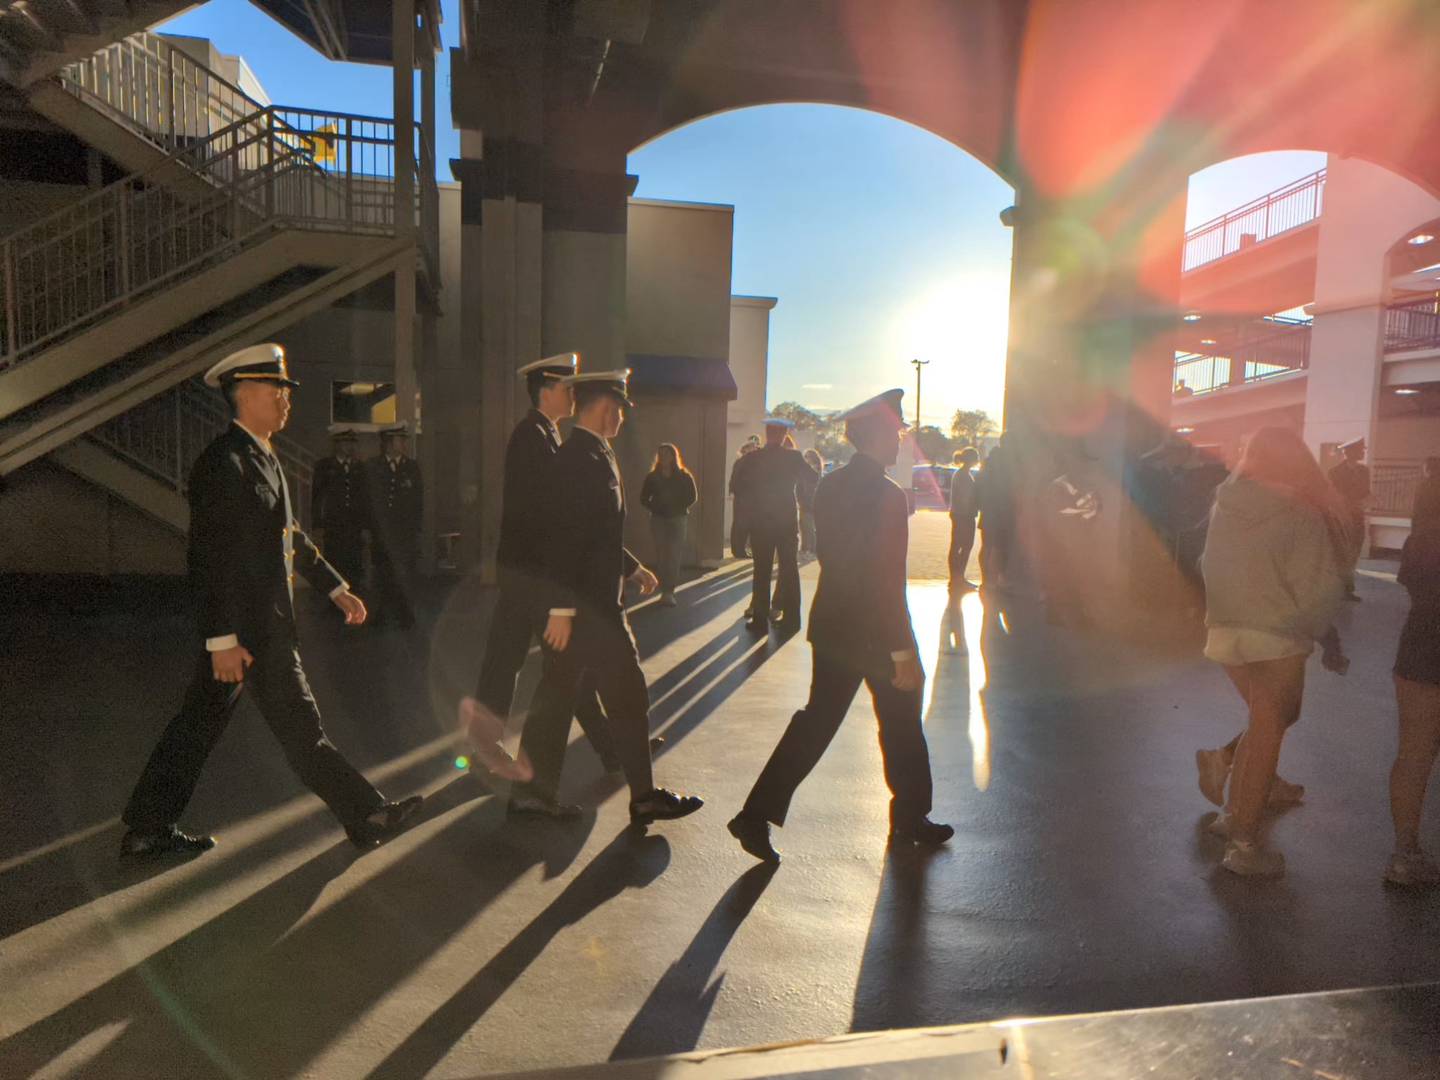 Naval Academy midshipmen walk past a gate at Navy Marine Corps Memorial Stadium Saturday during a football game.